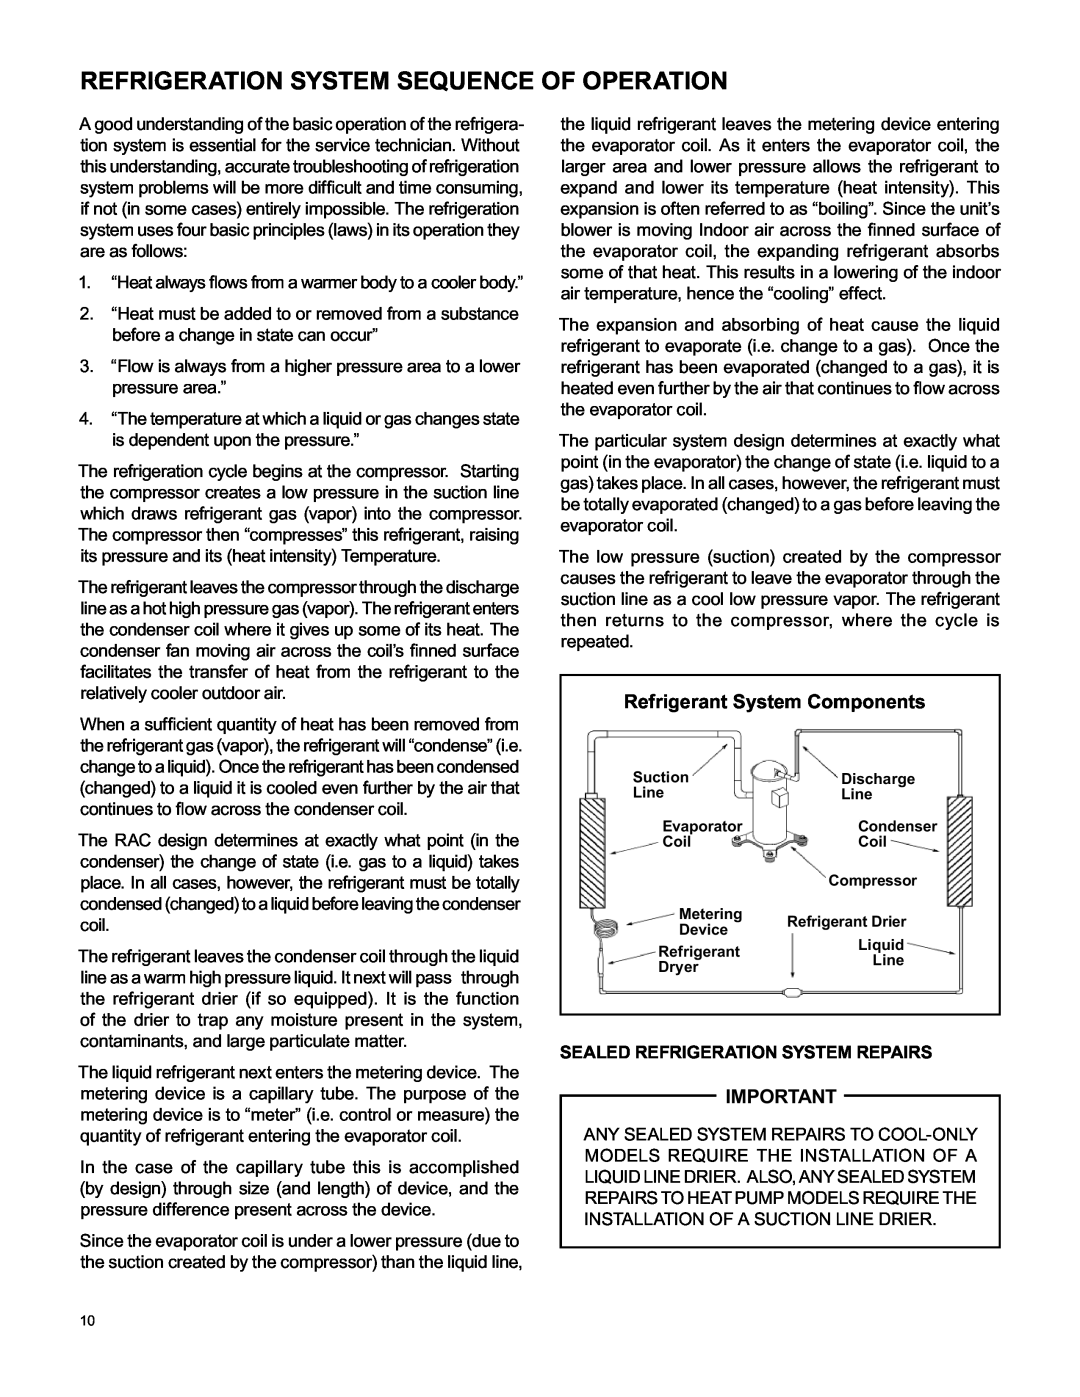 Friedrich RAC-SVC-06 service manual Refrigeration System Sequence Of Operation, Refrigerant System Components 